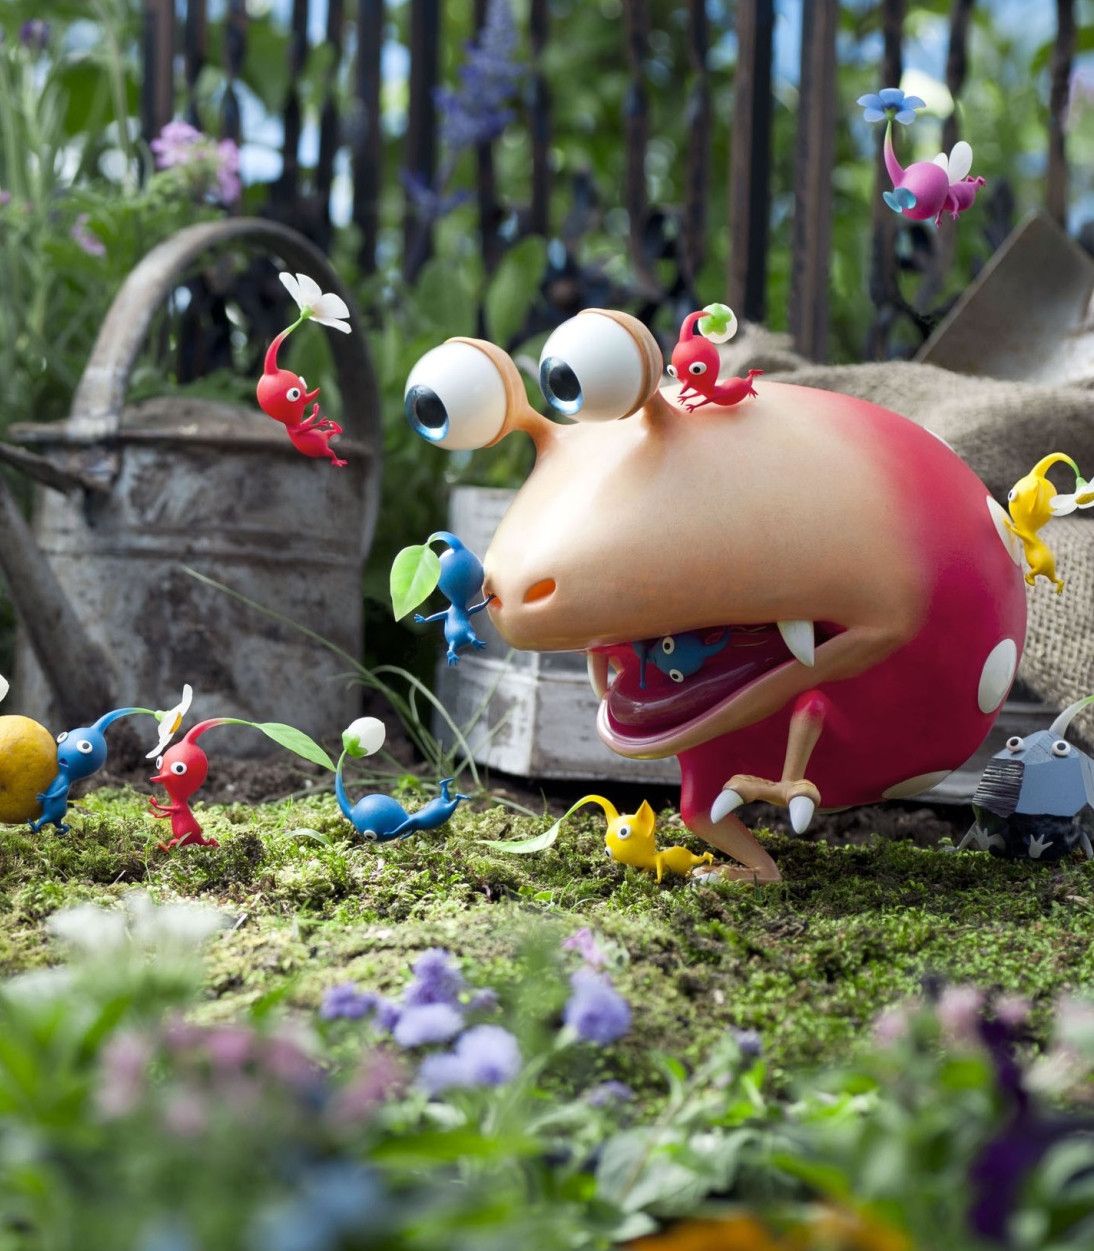 A cropped version of Pikmin 3's key art